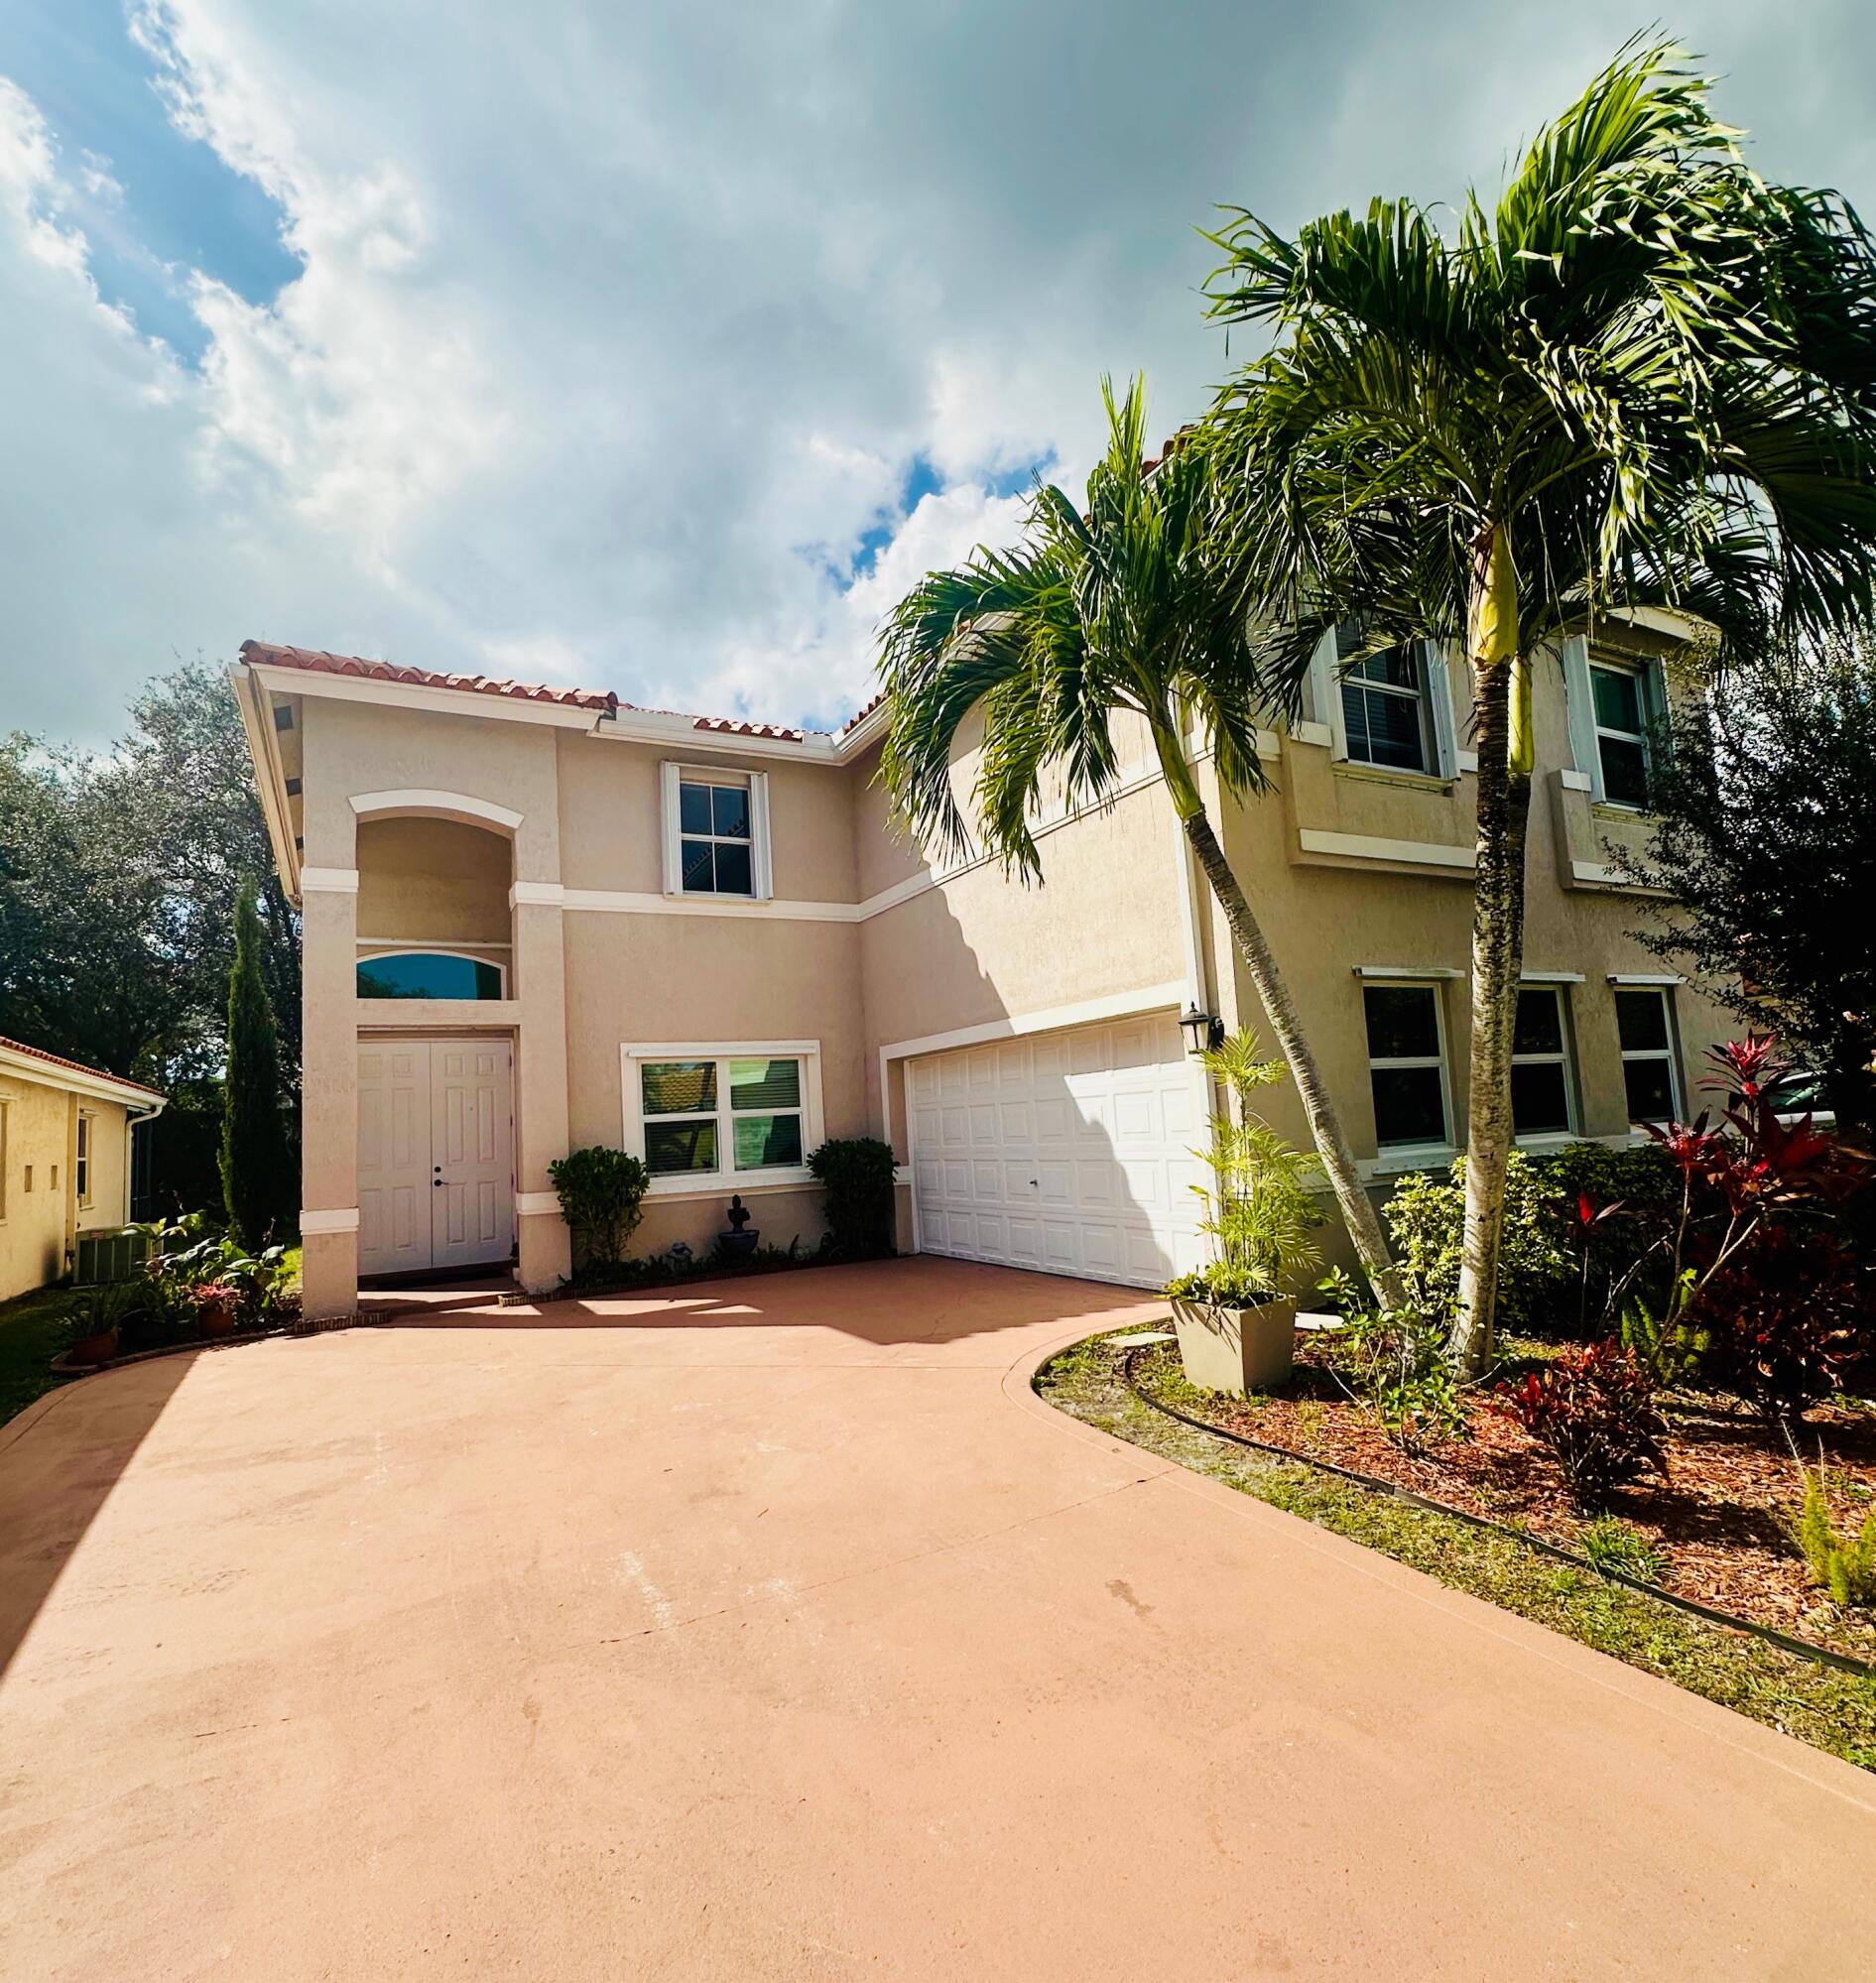 Property for Sale at 7357 Nautica Way, Lake Worth, Palm Beach County, Florida - Bedrooms: 4 
Bathrooms: 2.5  - $575,000